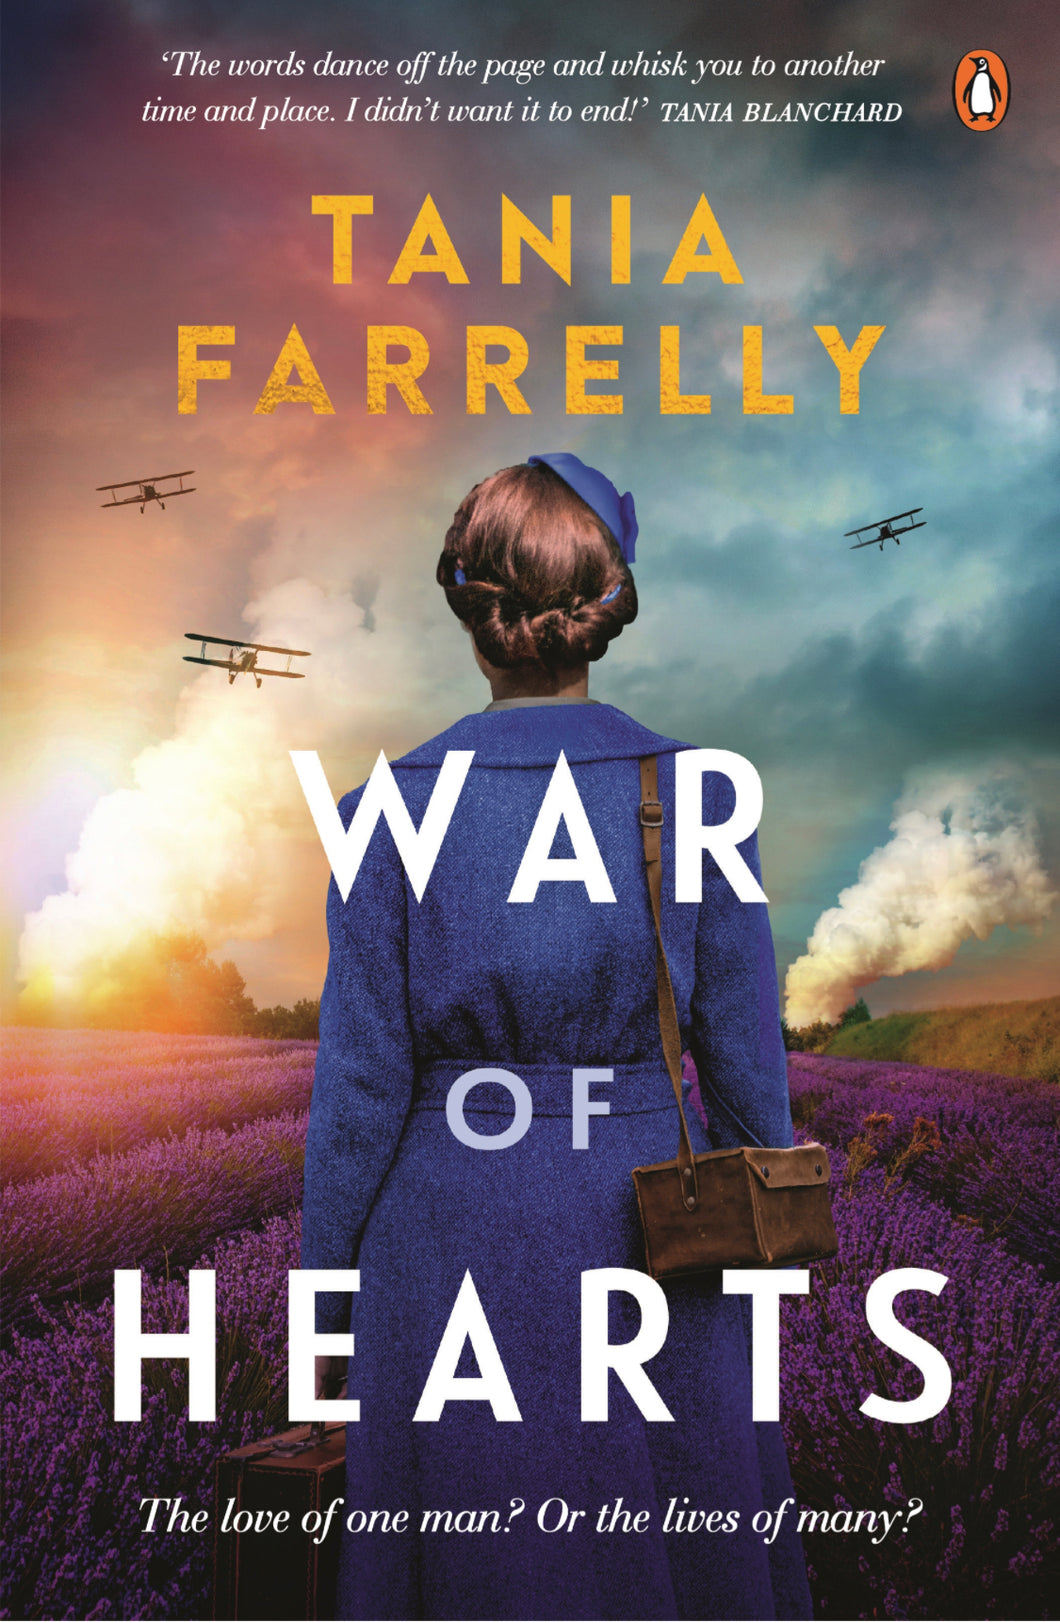 War of Hearts by Tania Farrelly